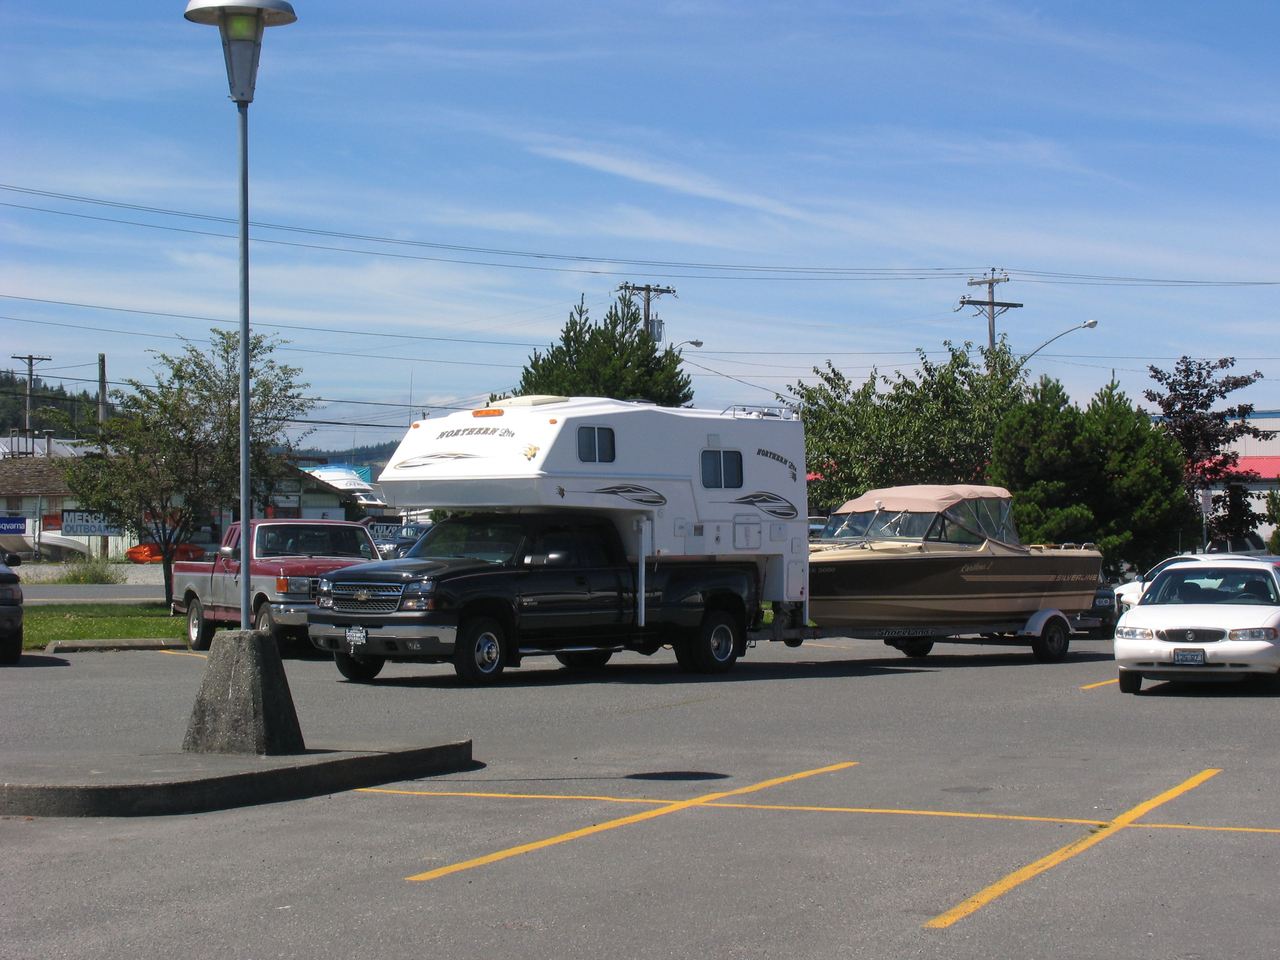 Pickup Camper Unit and Boat, let's go fishing!